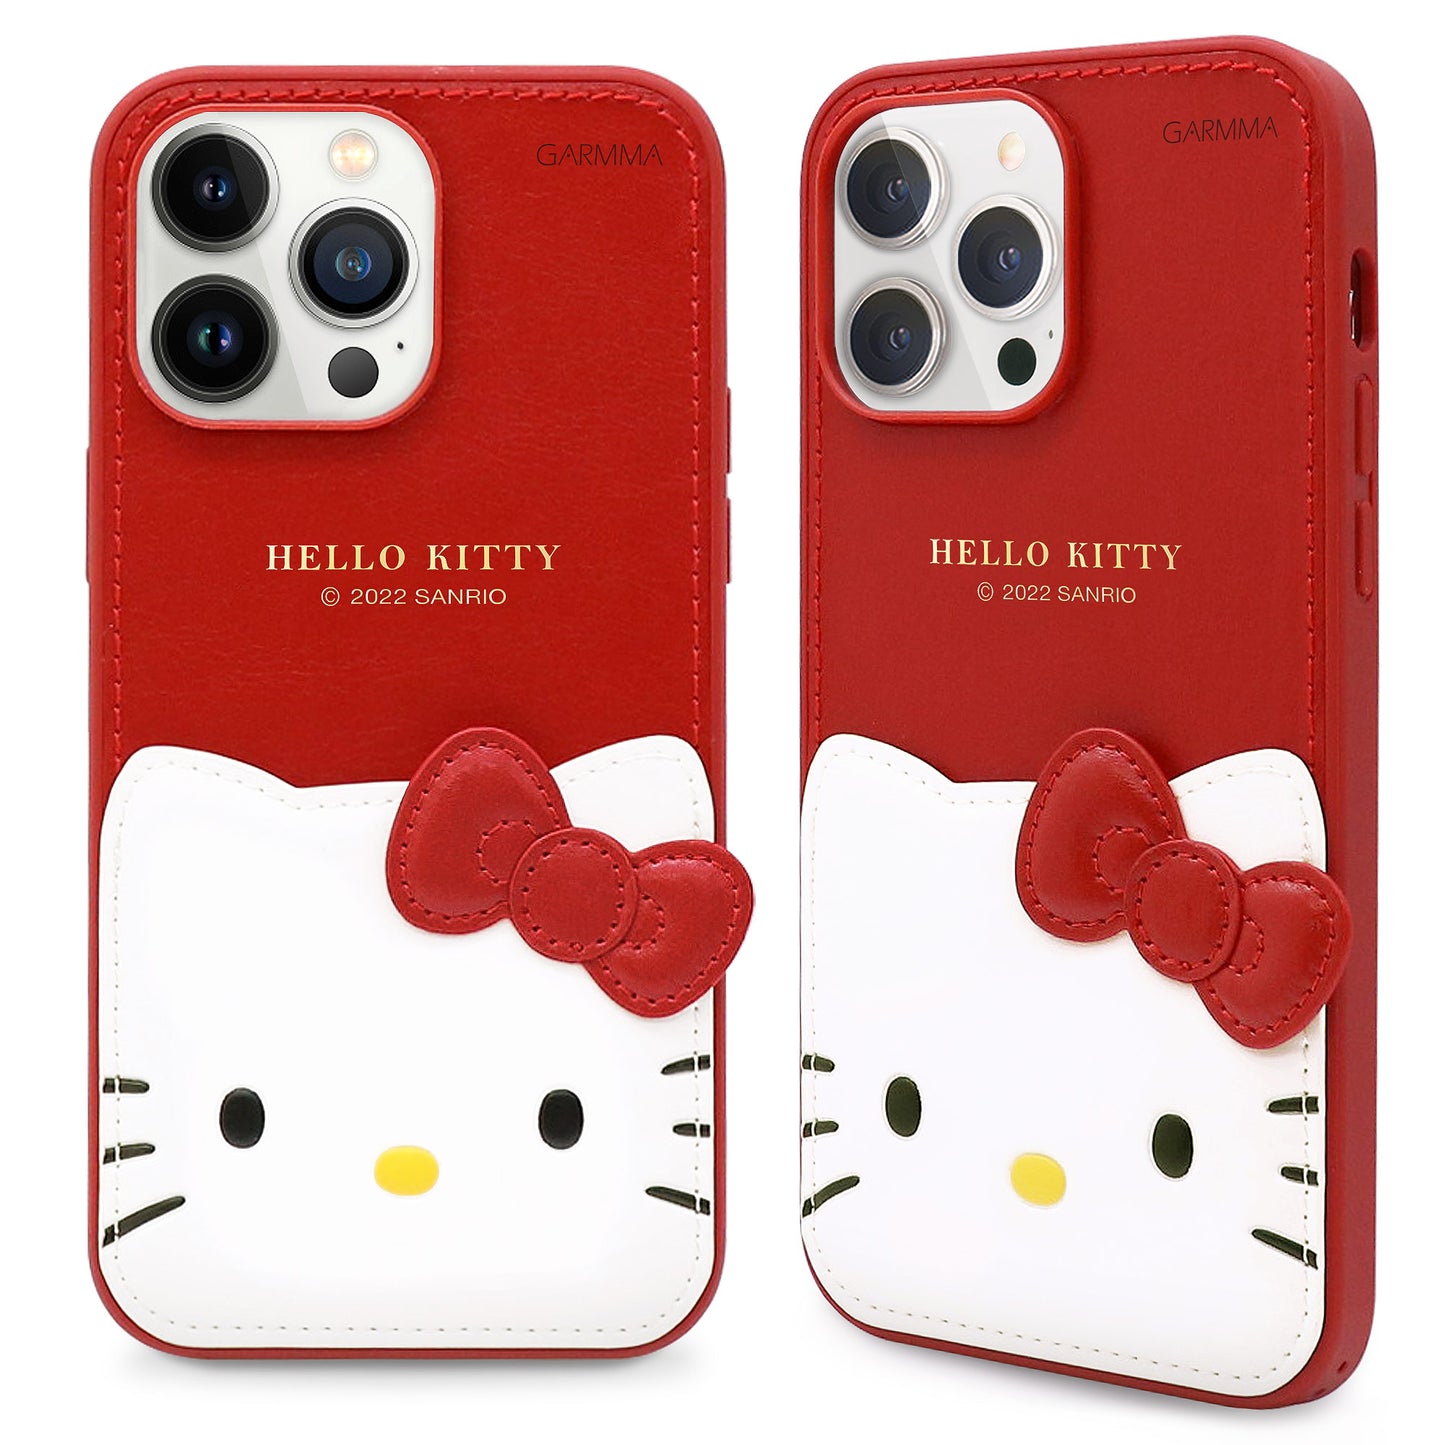 GARMMA Hello Kitty Gold Tooled Leather Case Cover for Apple iPhone